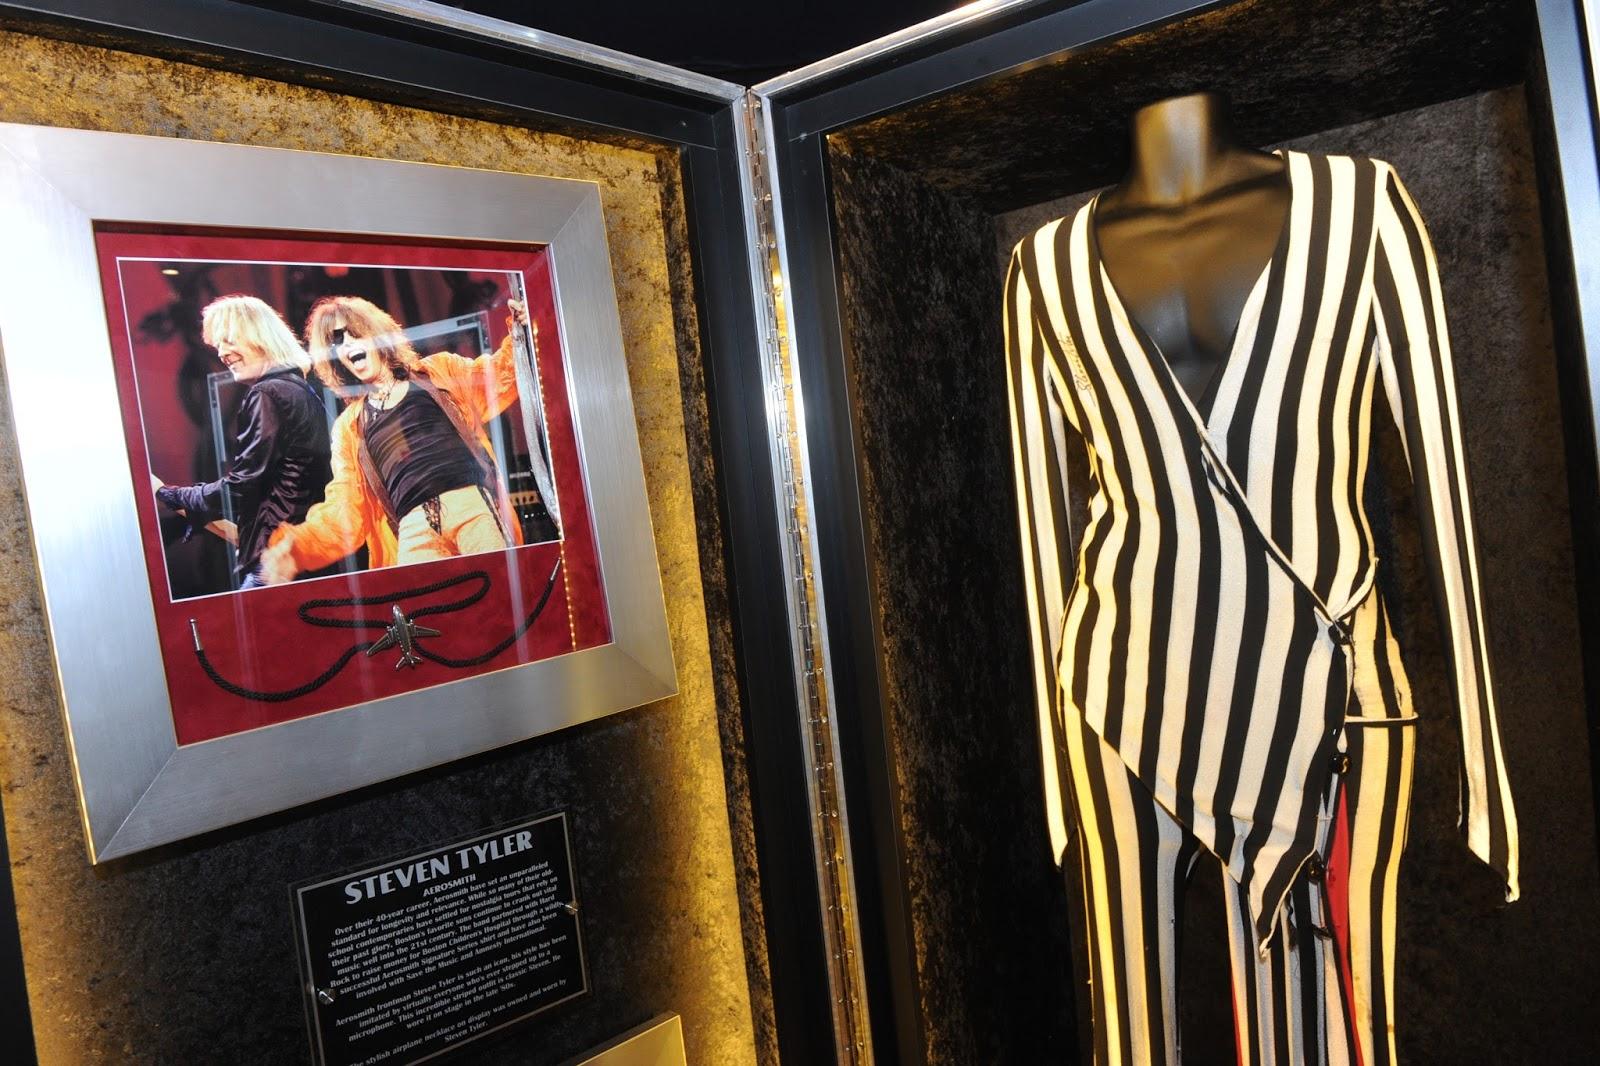 Hard Rock Cafe presents rock 'n roll treasures in a new exhibition